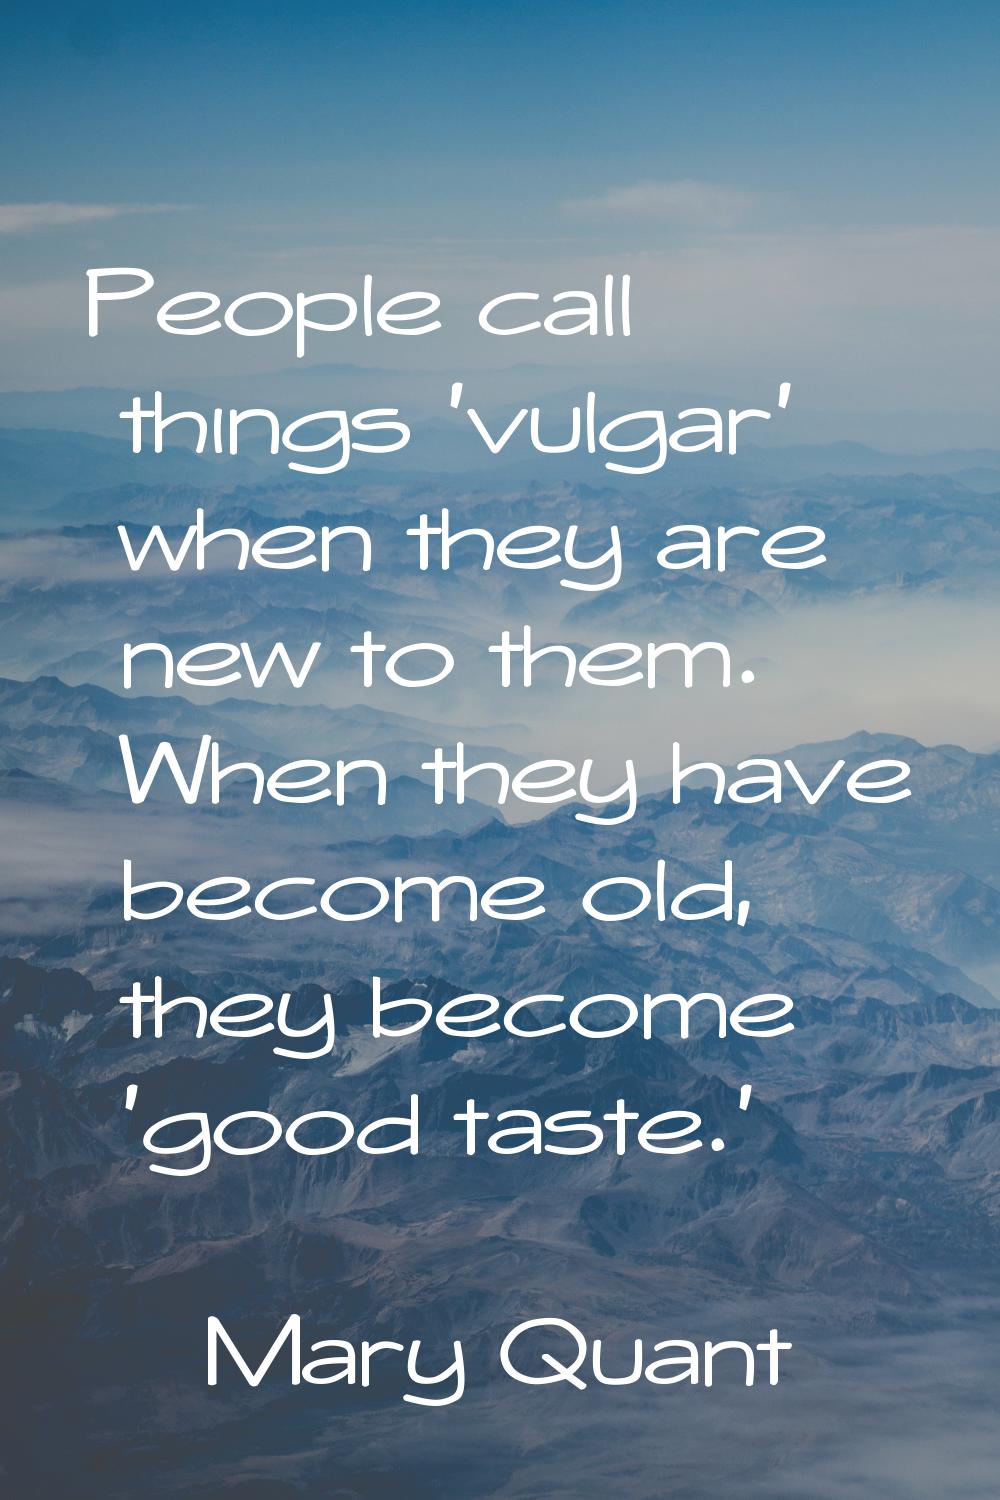 People call things 'vulgar' when they are new to them. When they have become old, they become 'good